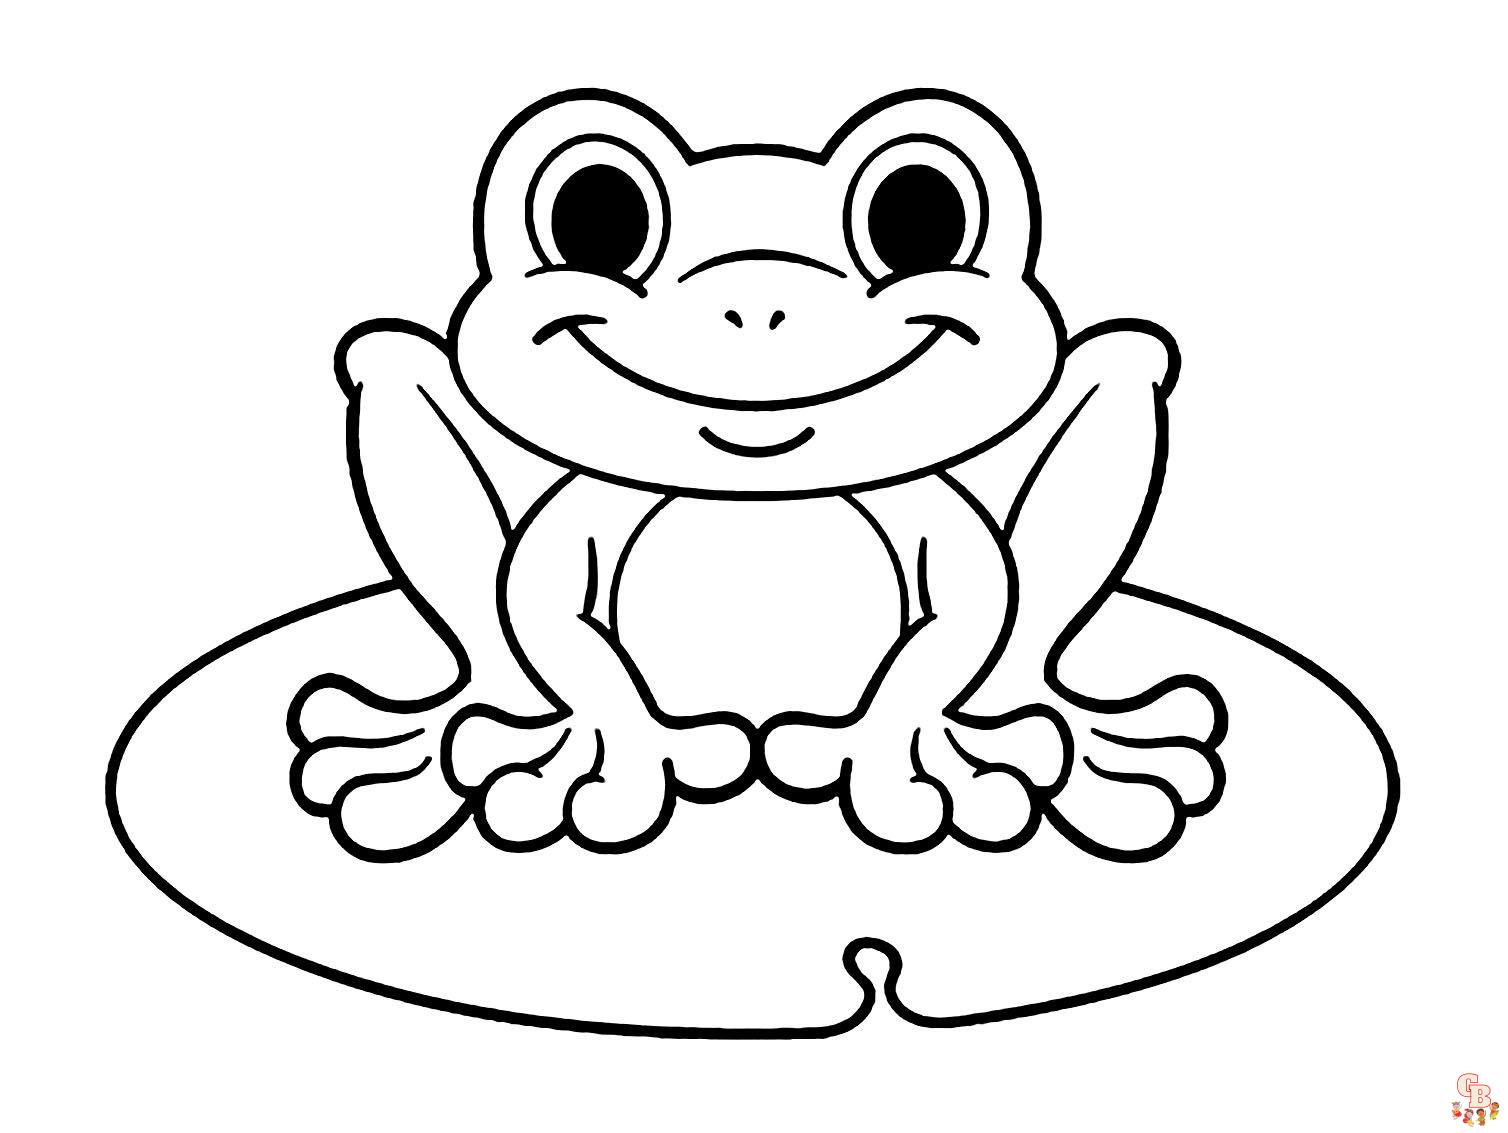 Free Cute Frog coloring pages for kids